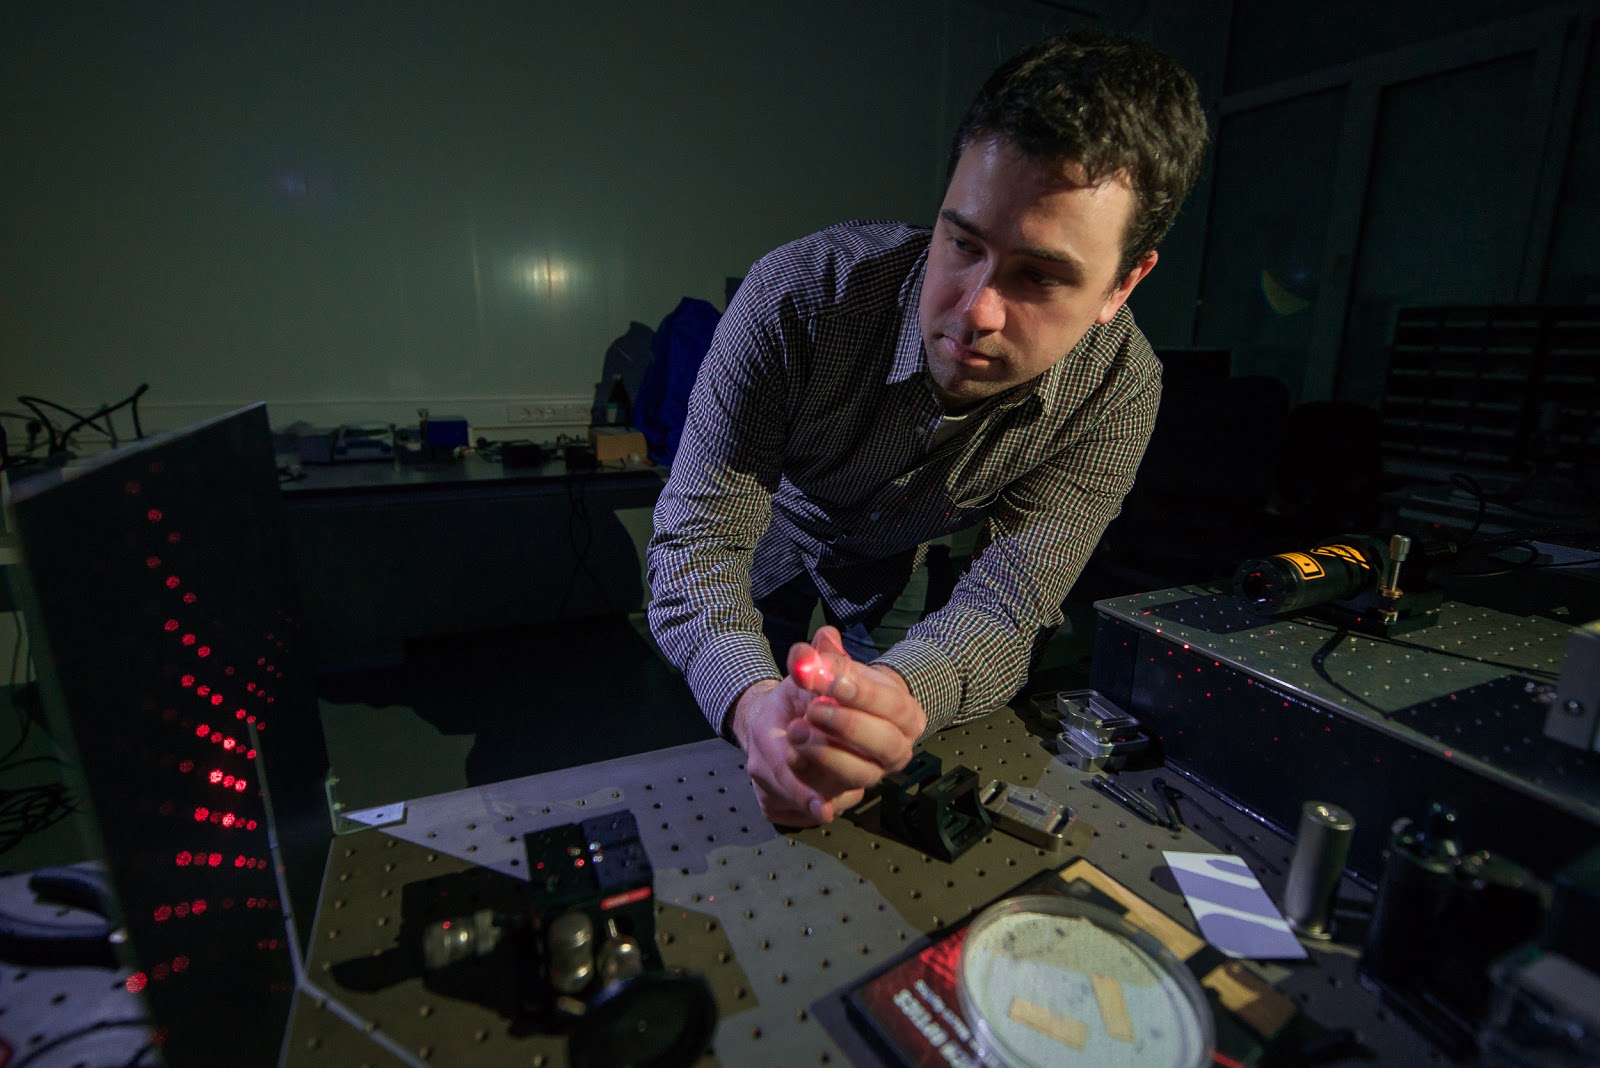 Alexey Shcherbakov demonstrates the diffraction pattern from a two-dimensional grating